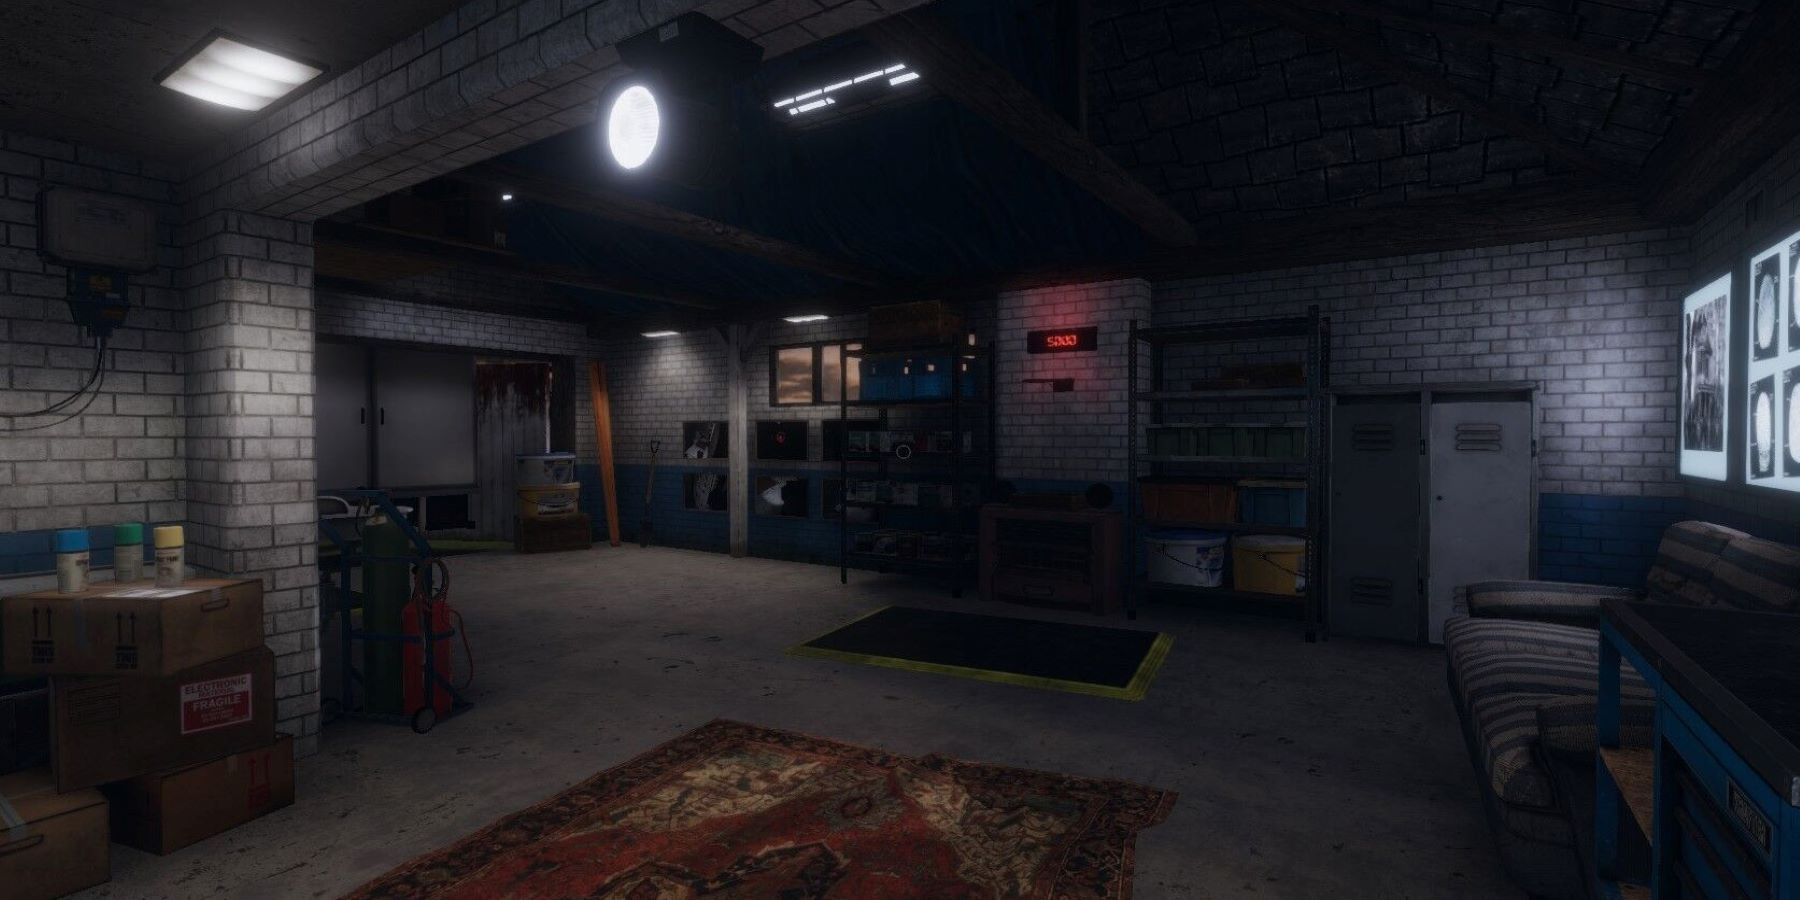 Screenshot of the Phasmophobia lobby from the main menu board, showing the lockers, basketball hoop, and carpet